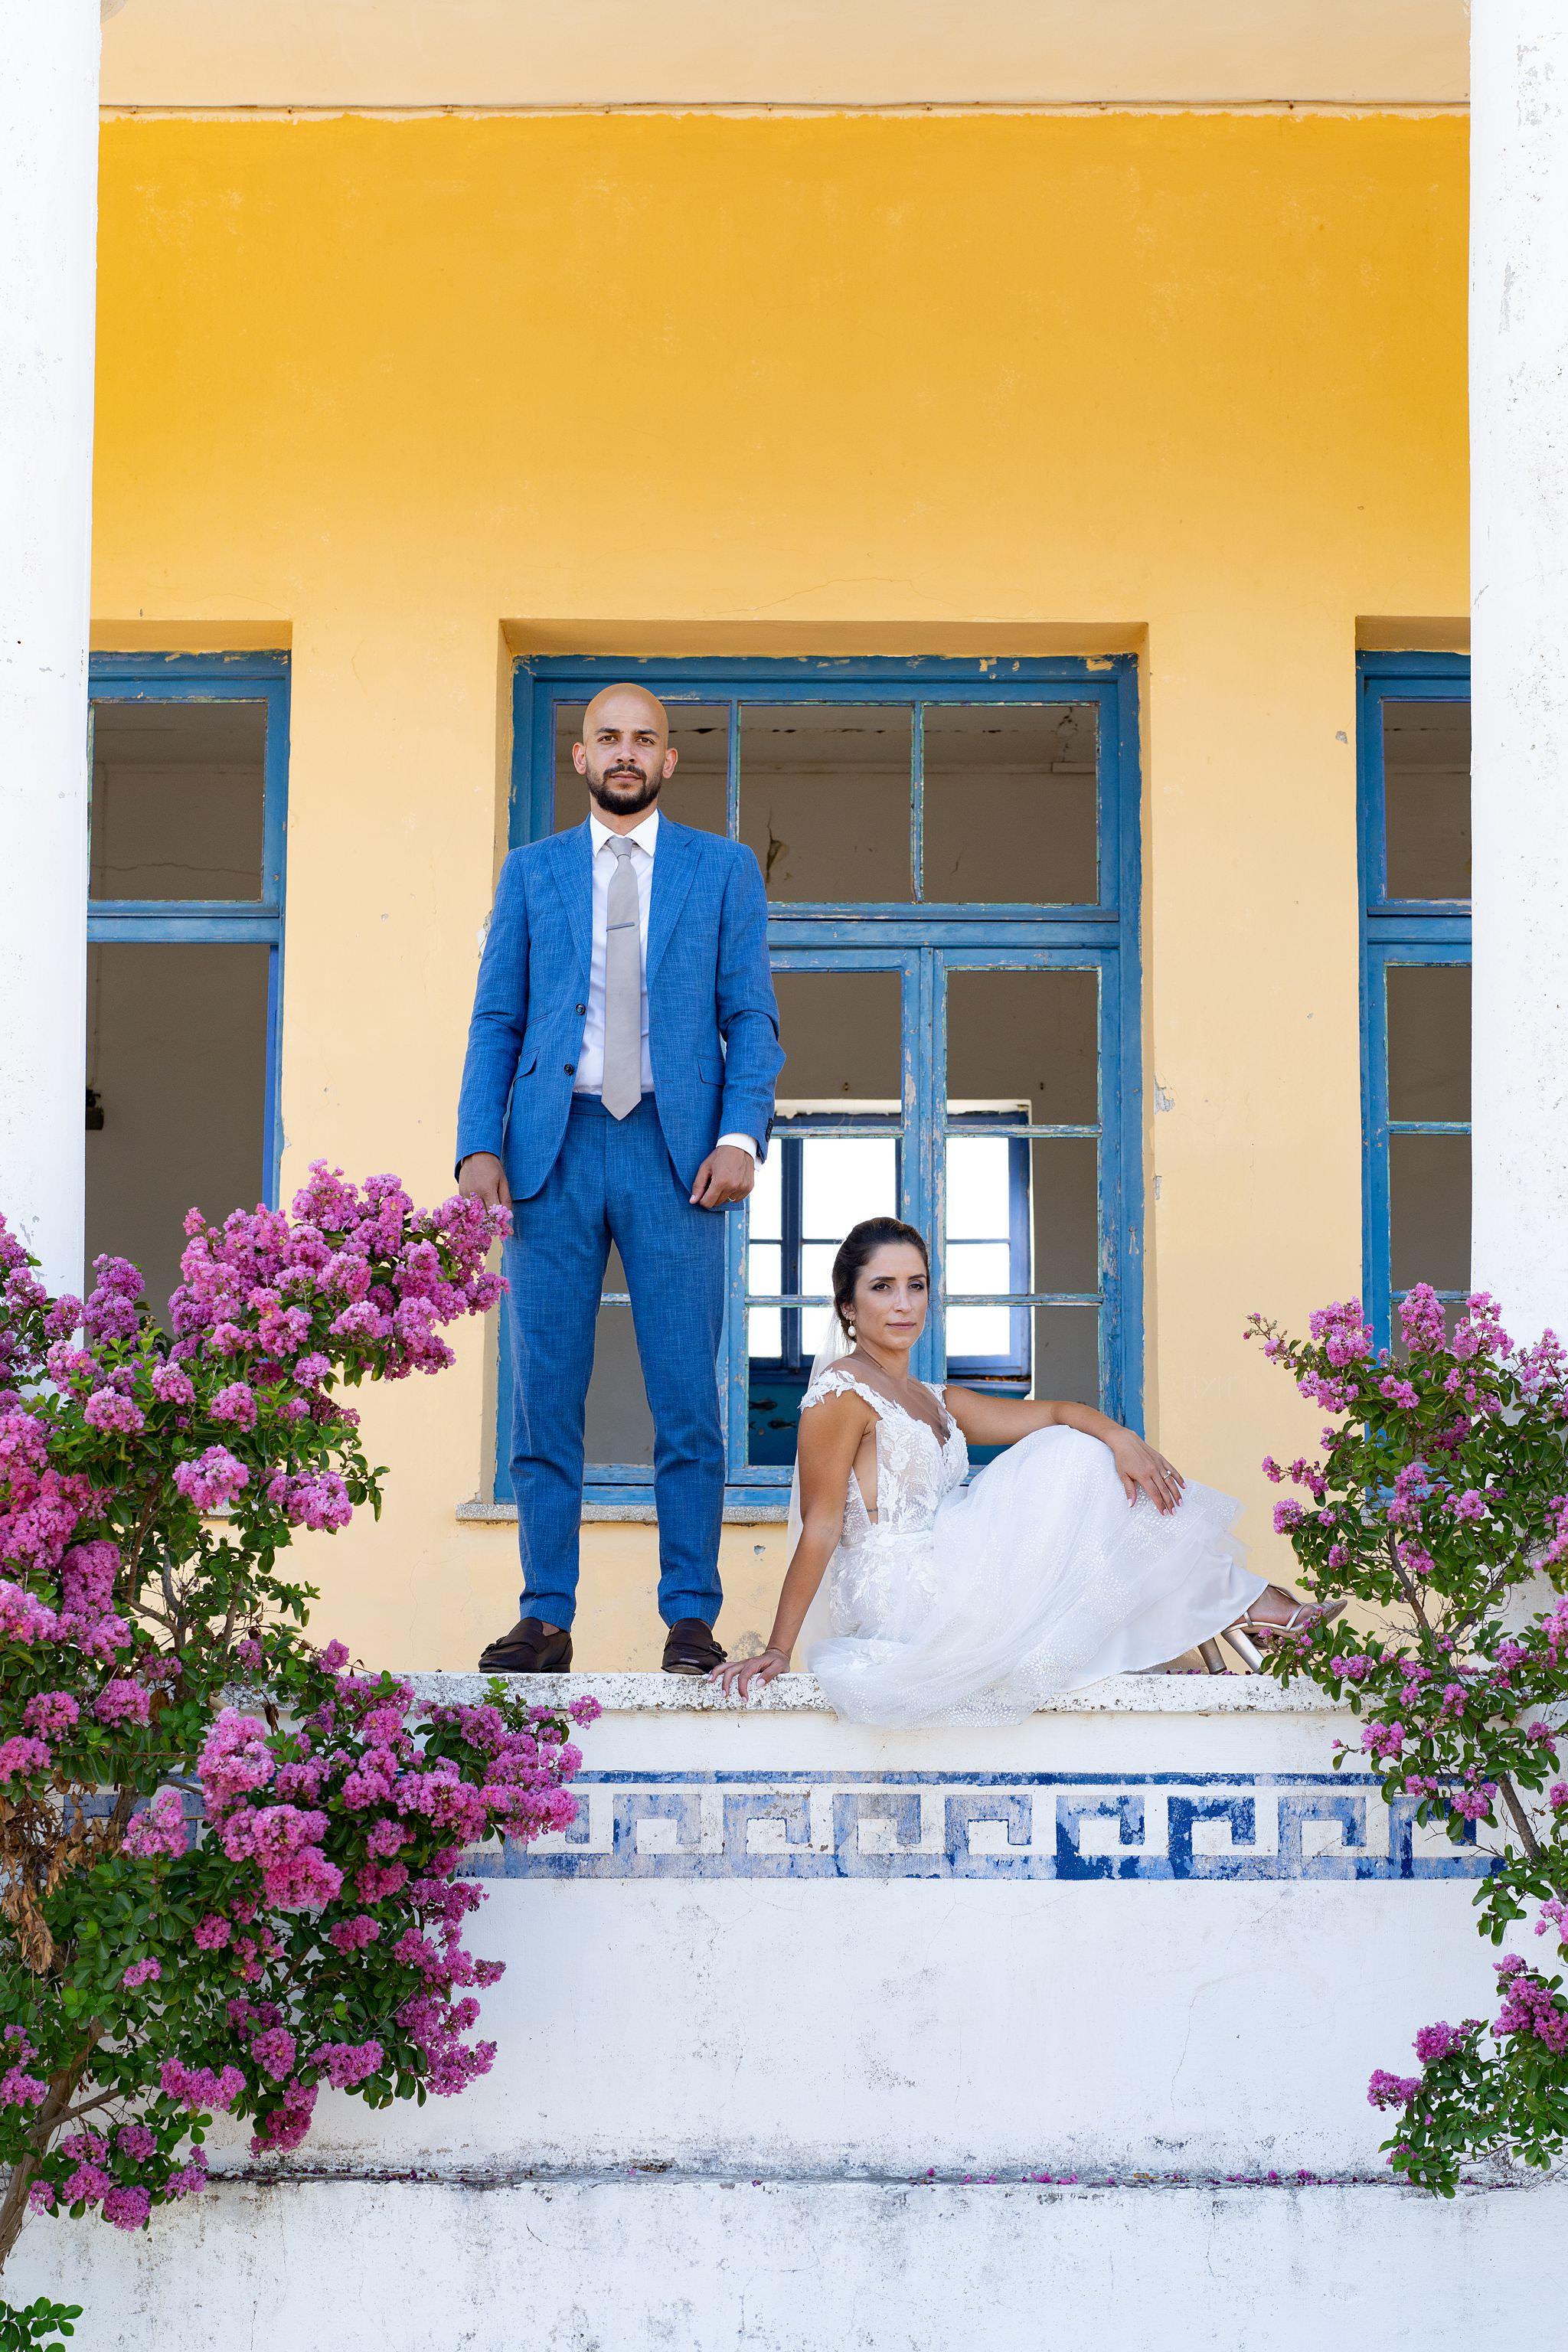 Autumn wedding with Arabian vibes on the island of Kefalonia in Greece